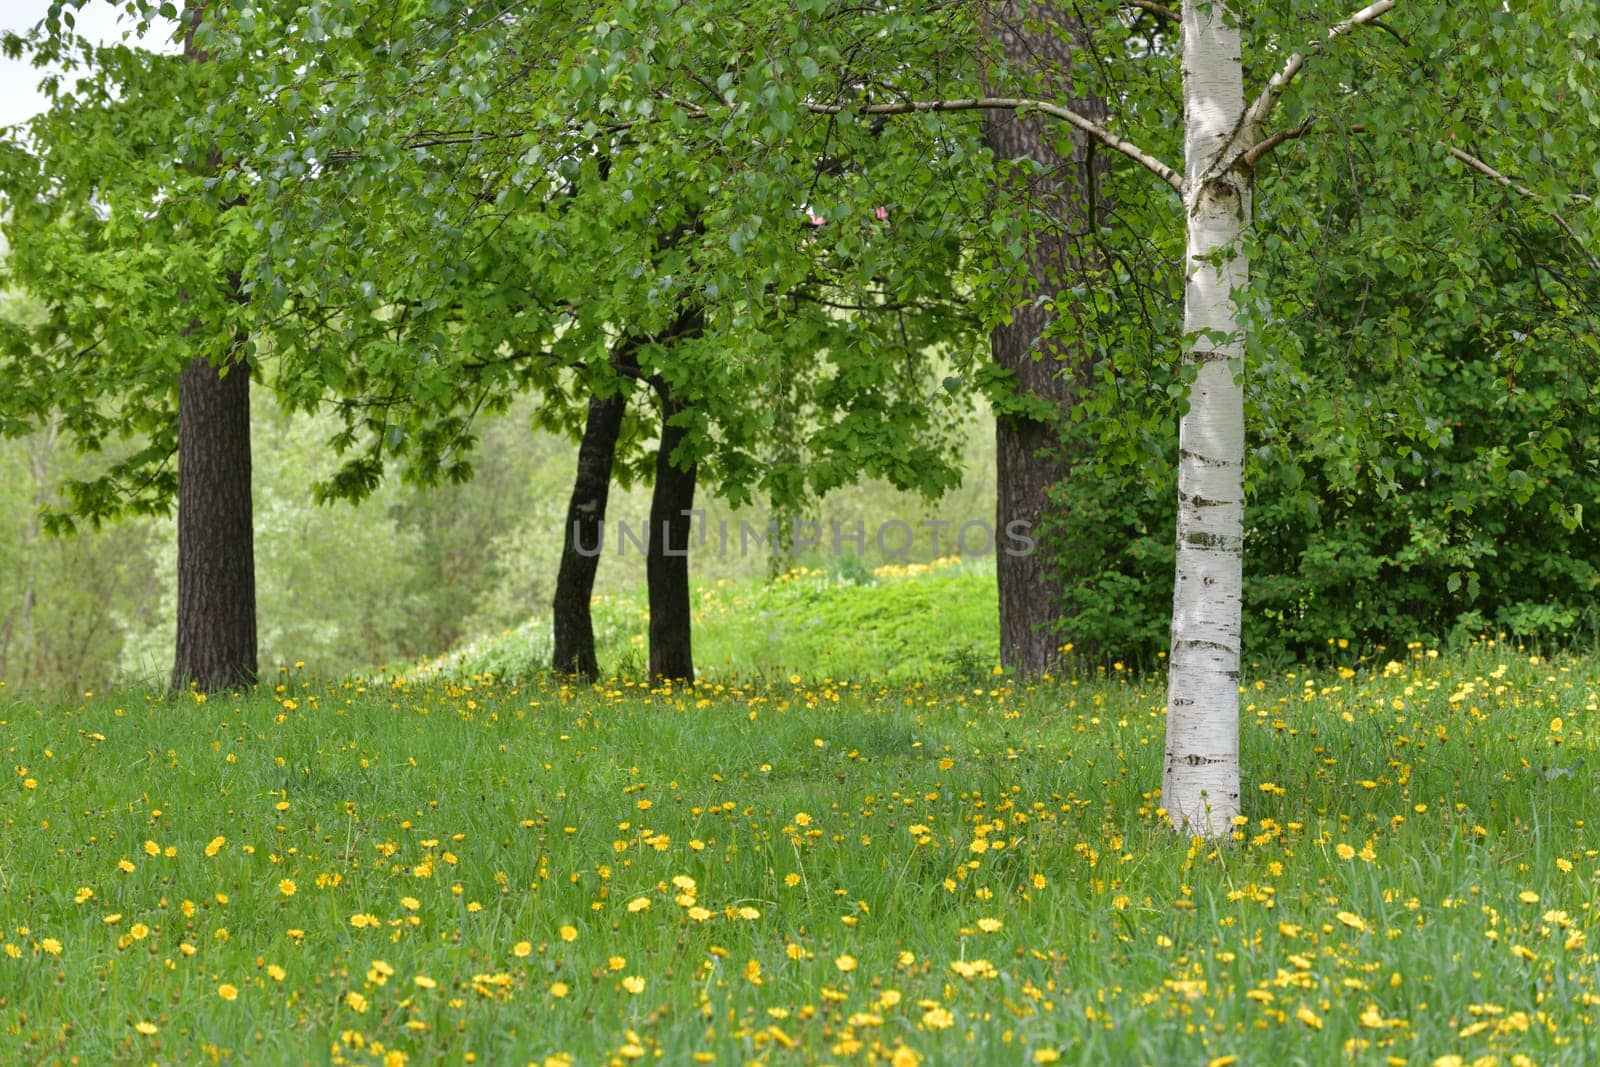 Forest edge with an yellow blooming dandelions